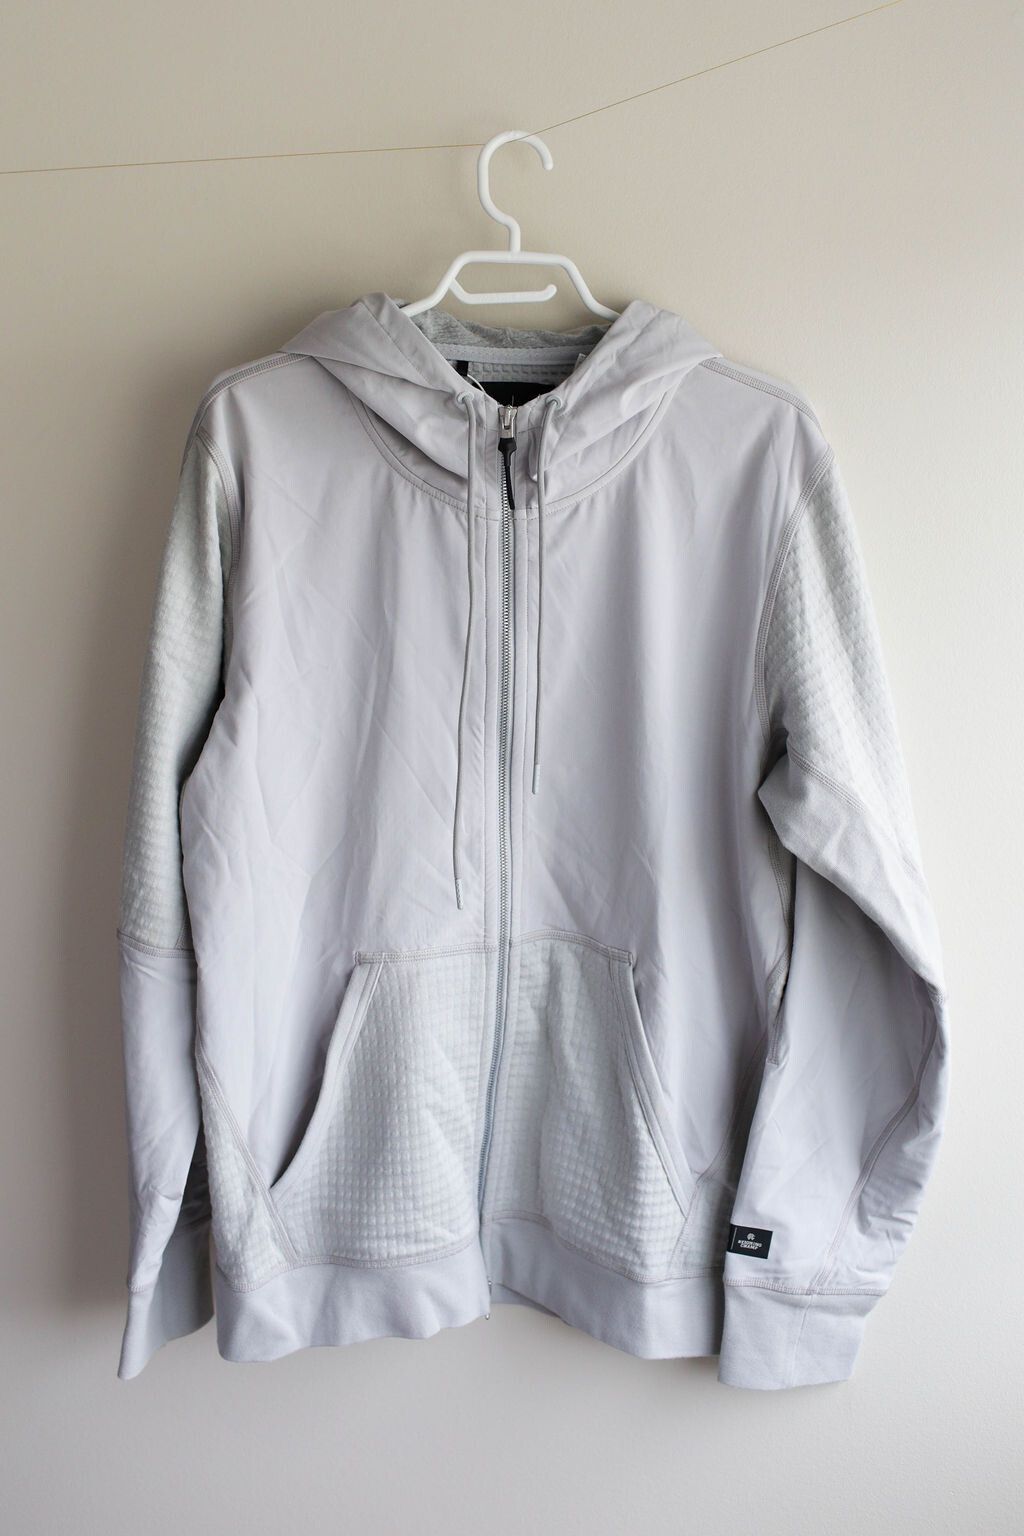 Adidas adidas X Reigning Champ Zip Up | Grailed